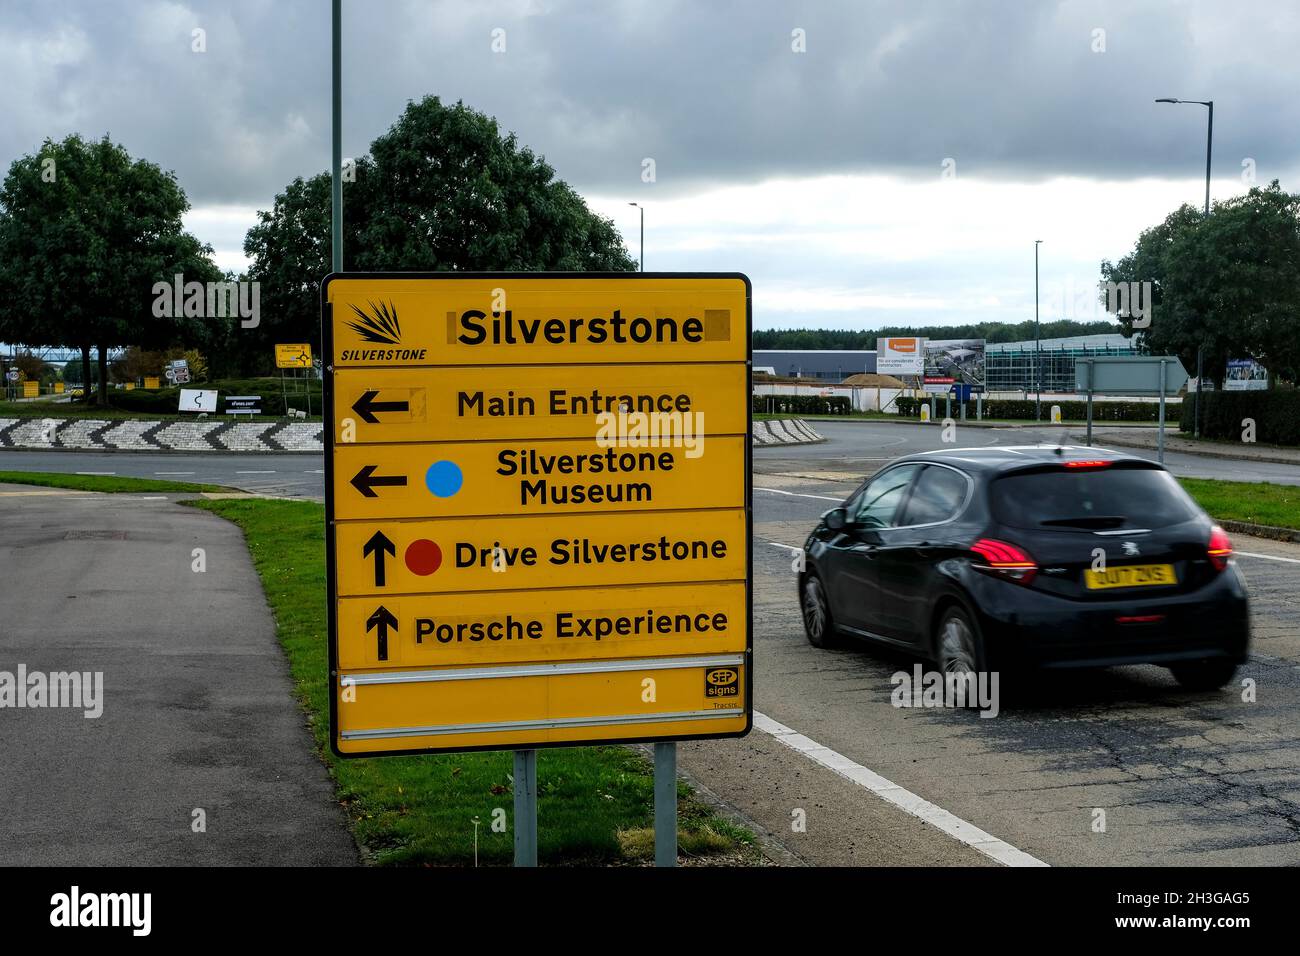 A sign giving directions to the various attractions at Silverstone Circuit, Northamptonshire, UK Stock Photo